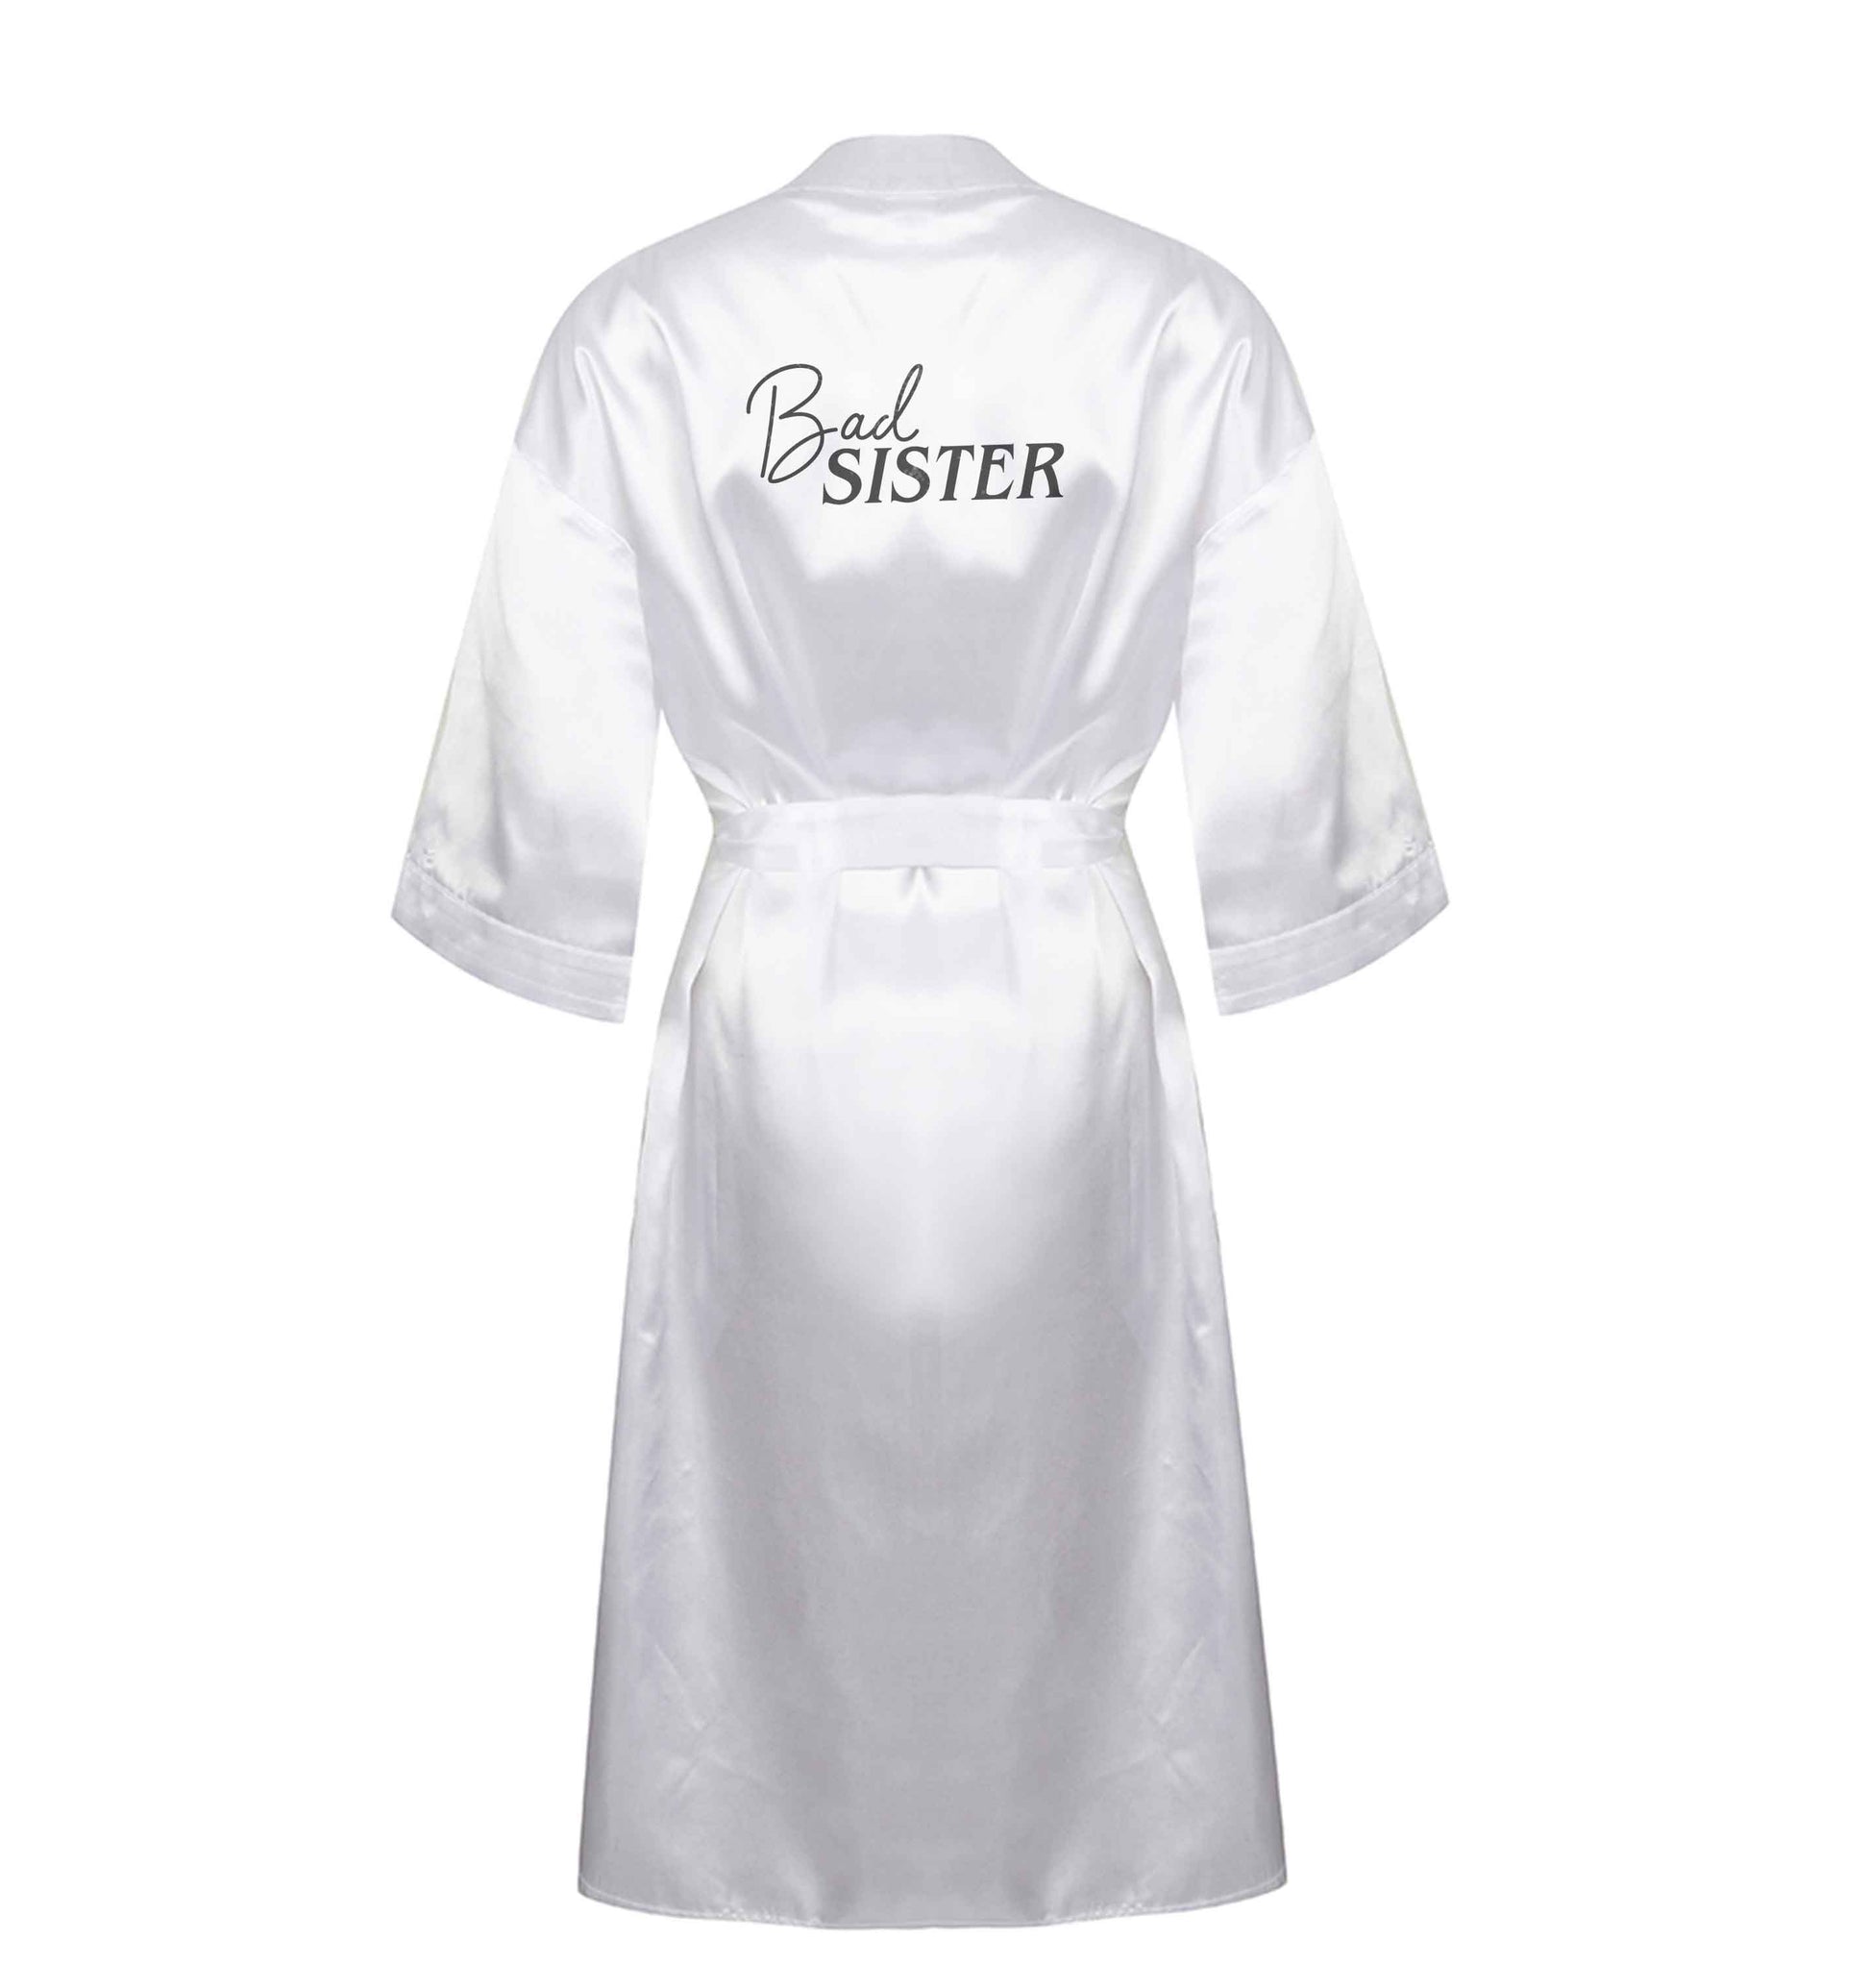 Bad sister XL/XXL white ladies dressing gown size 16/18